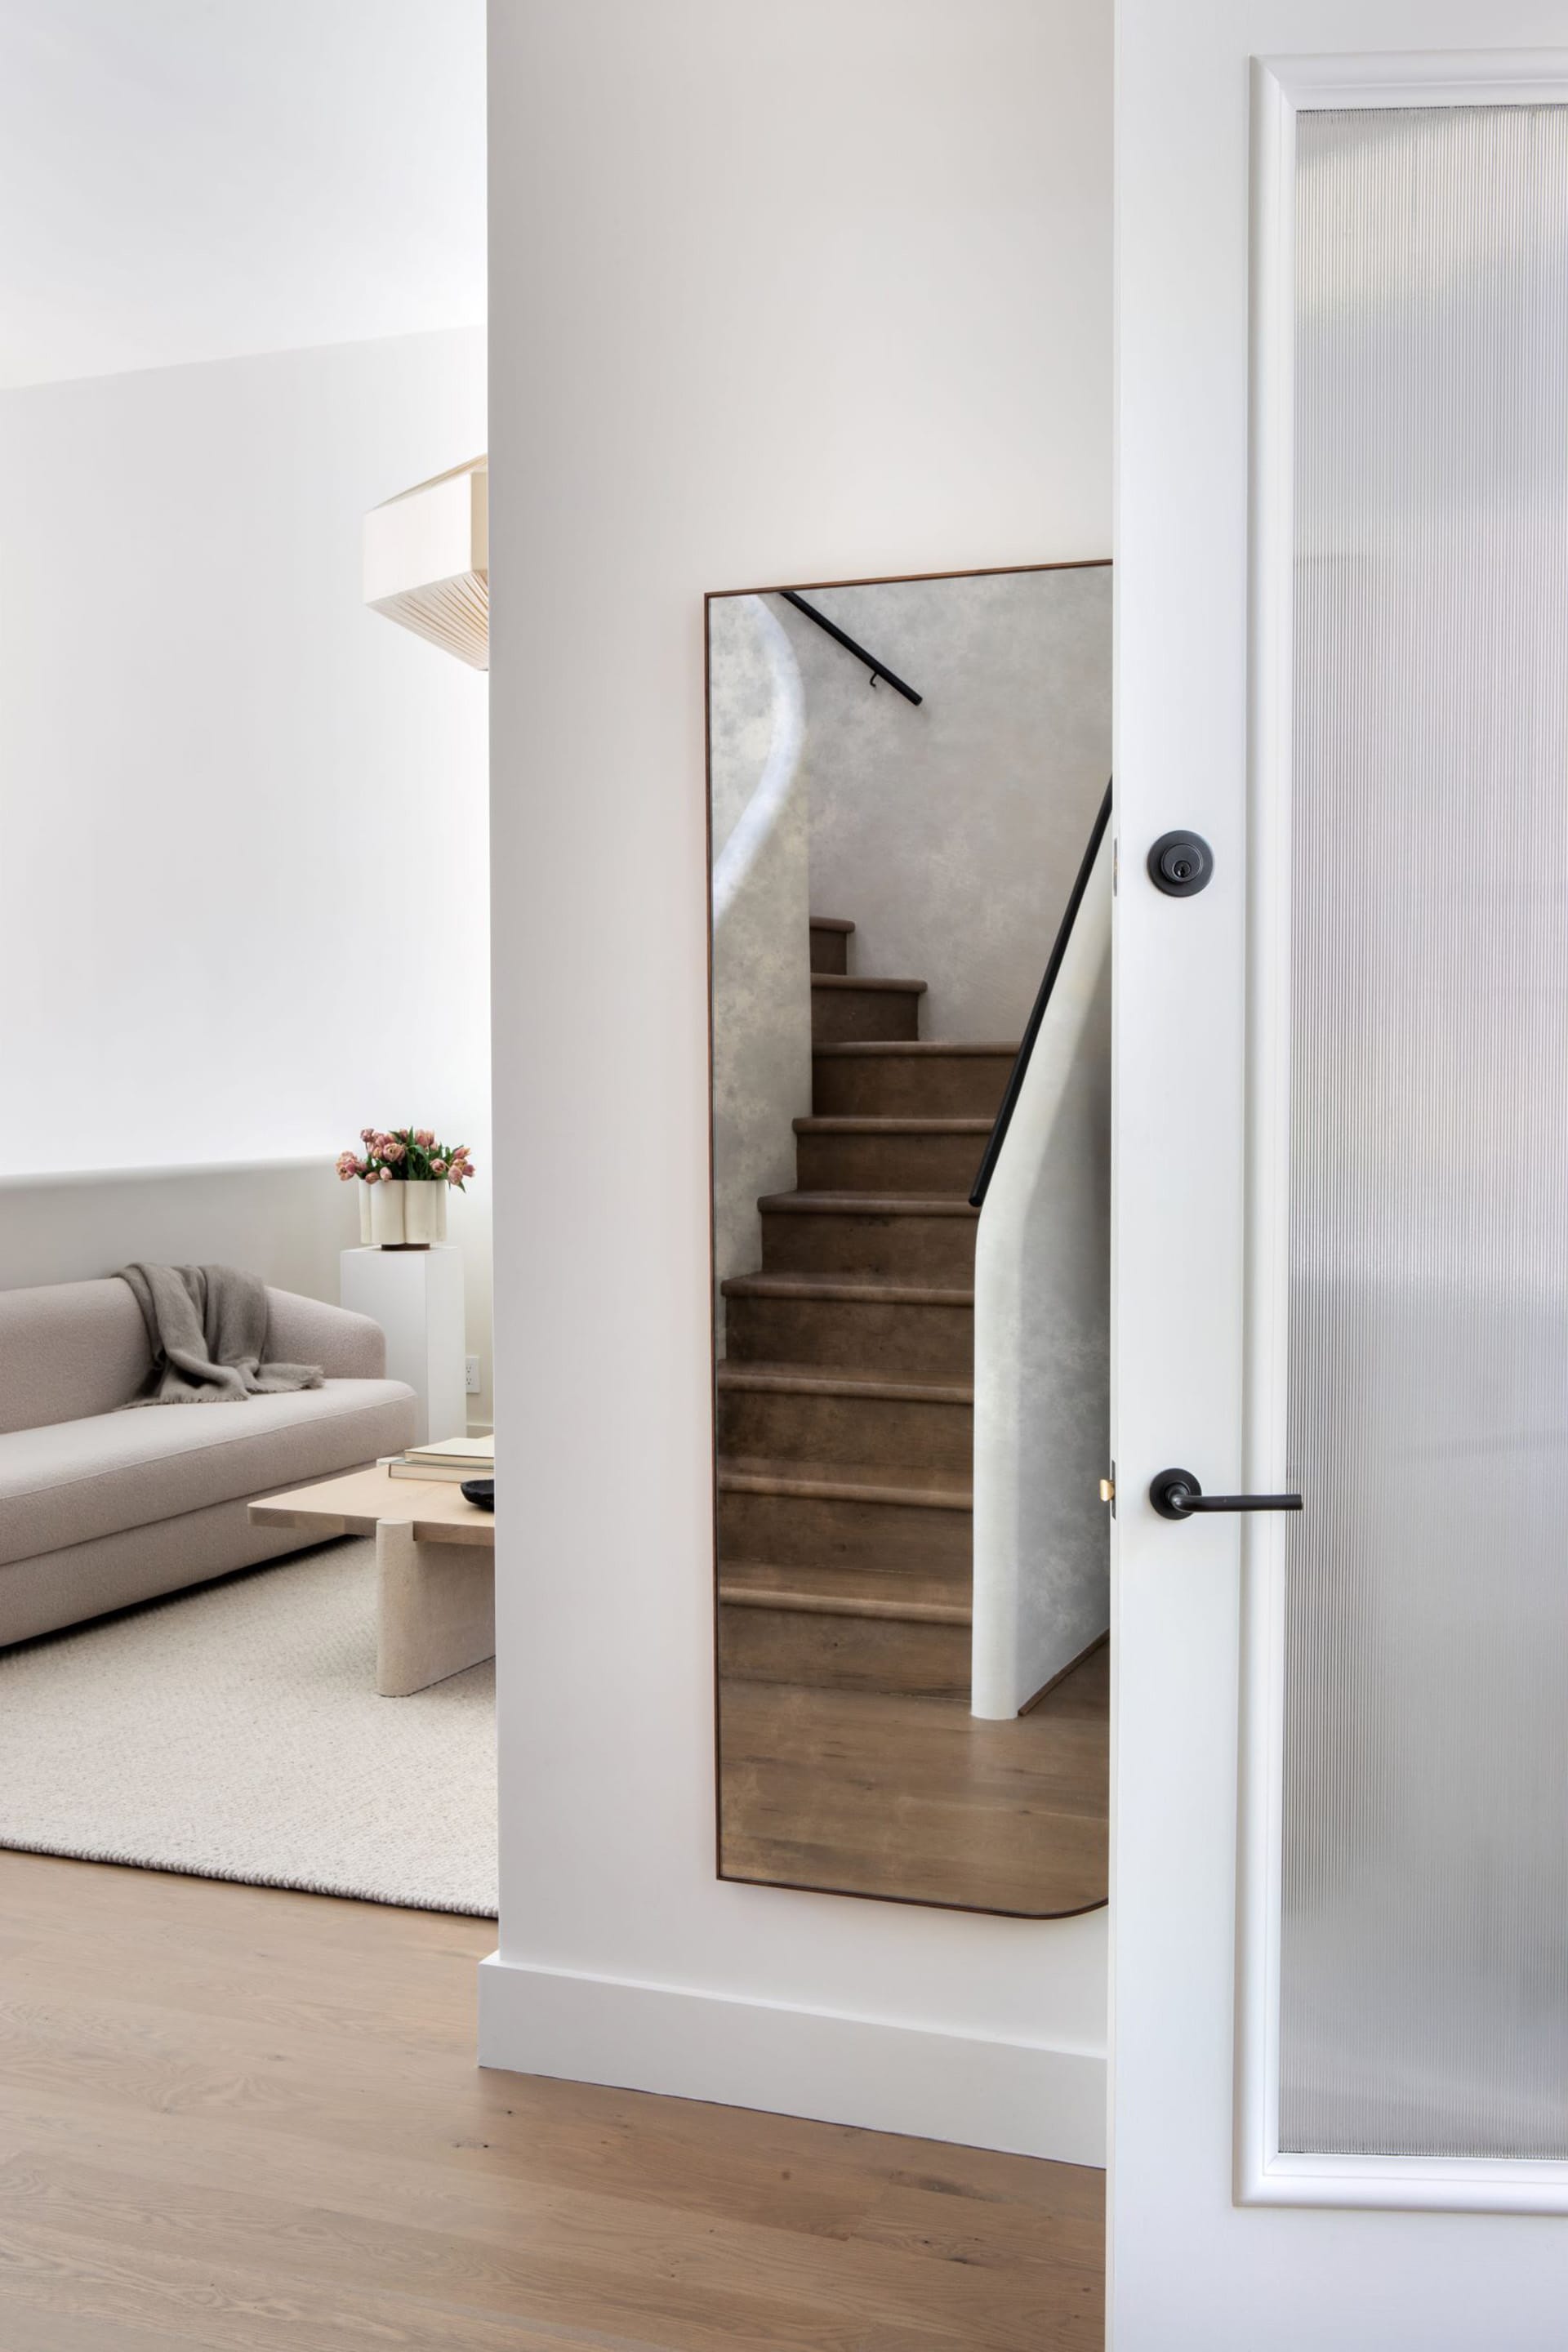 Weathered mirror in an entryway reflects a wood-floored plaster staircase.